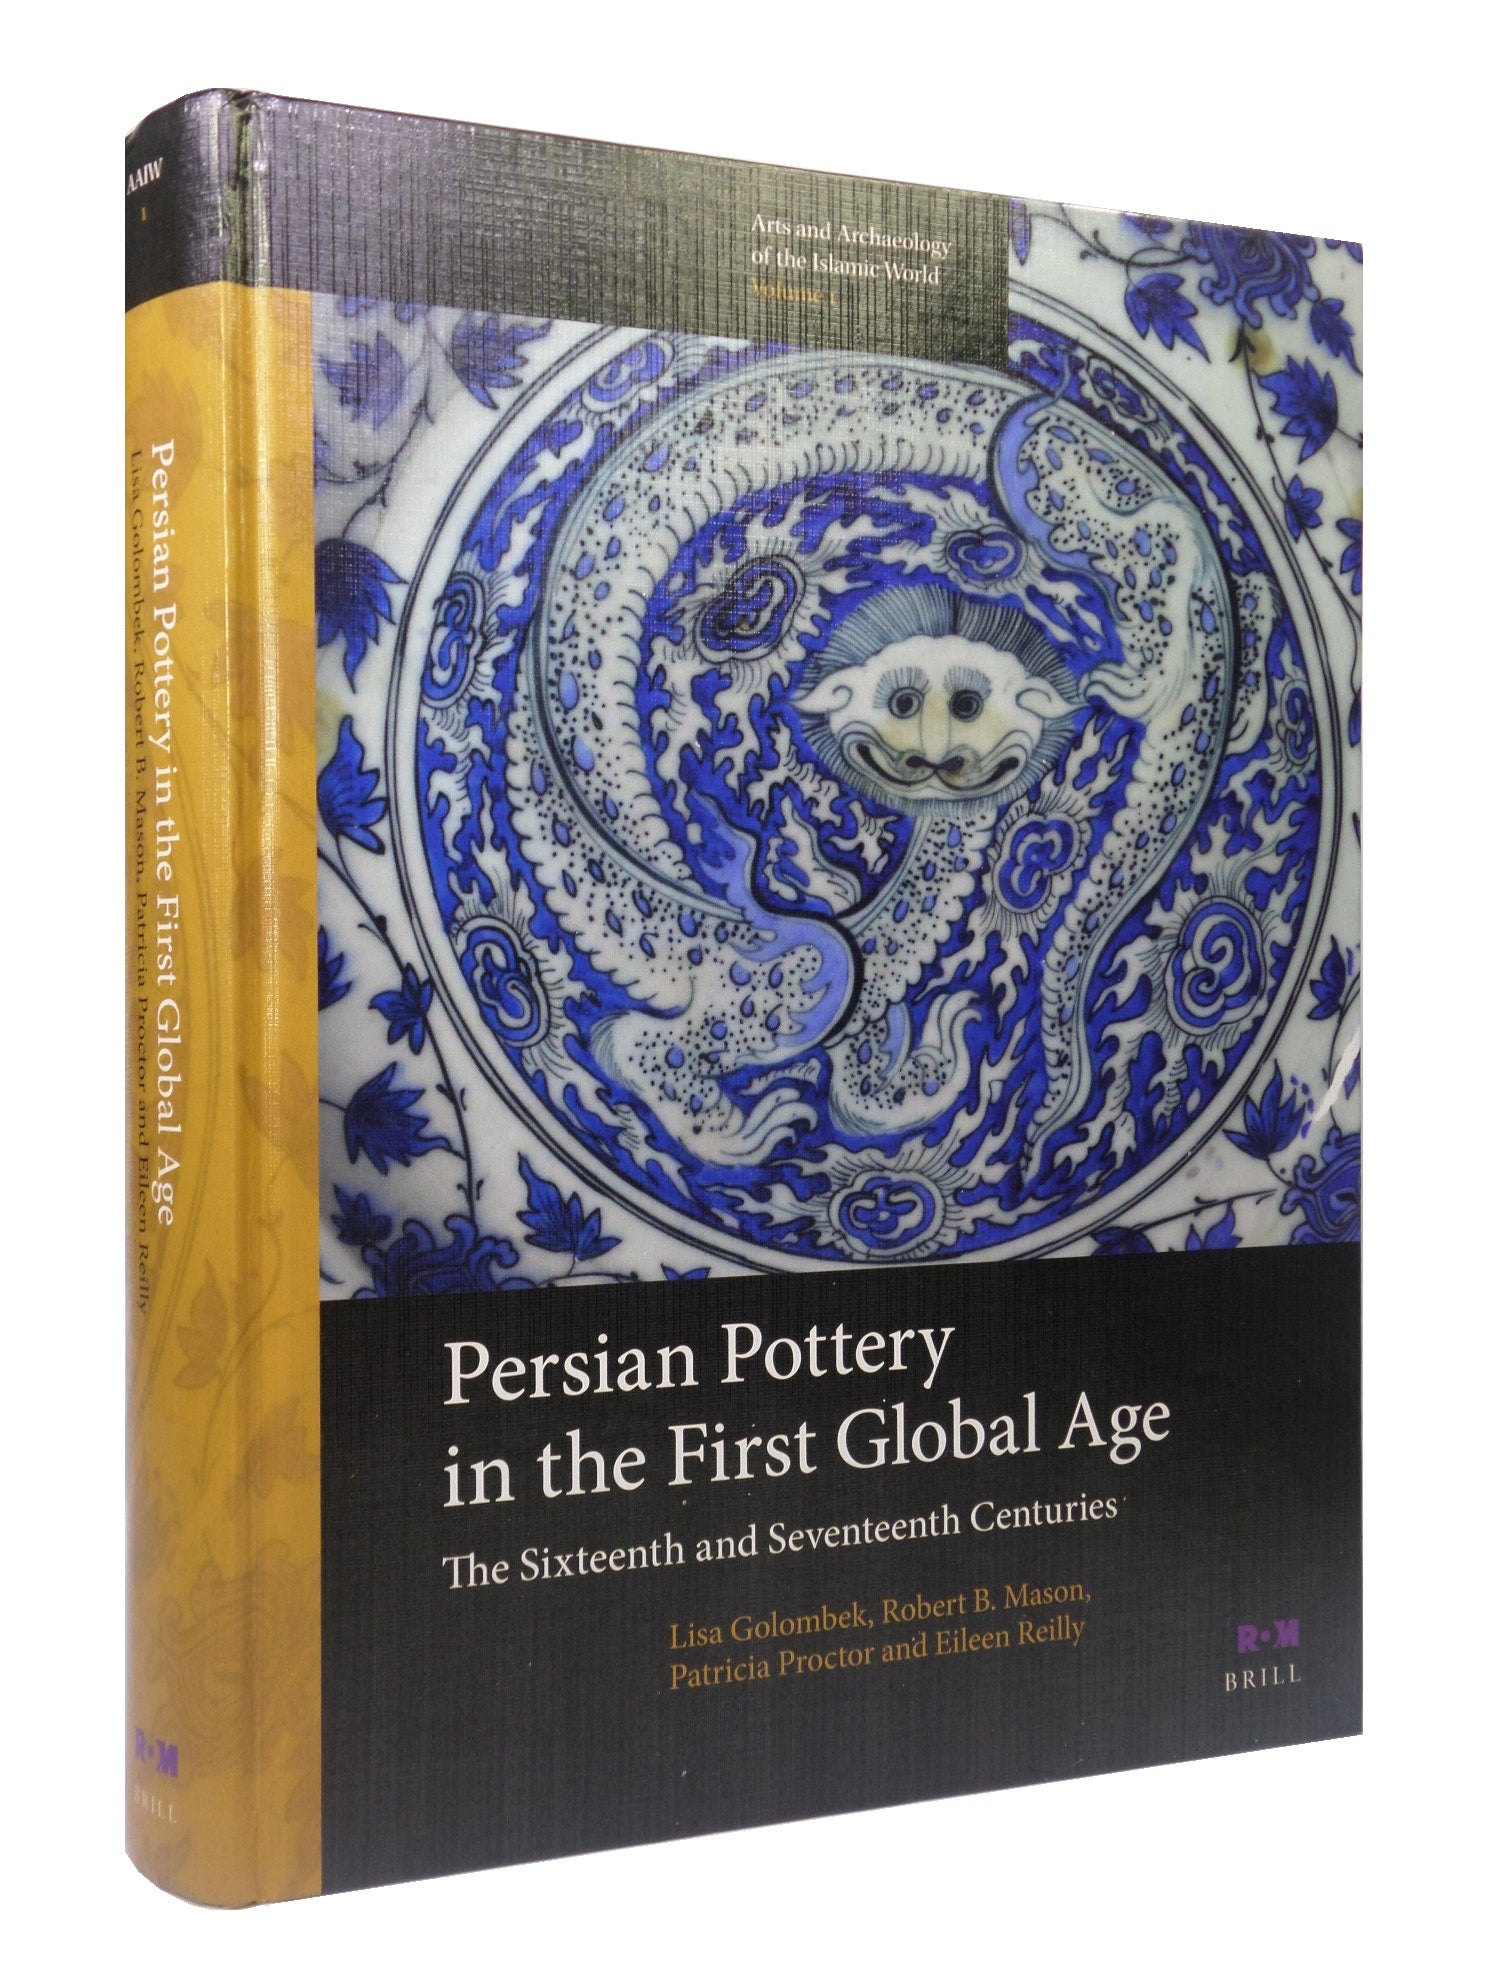 PERSIAN POTTERY IN THE FIRST GLOBAL AGE: THE SIXTEENTH AND SEVENTEENTH CENTURIES 2014 FIRST EDITION HARDCOVER